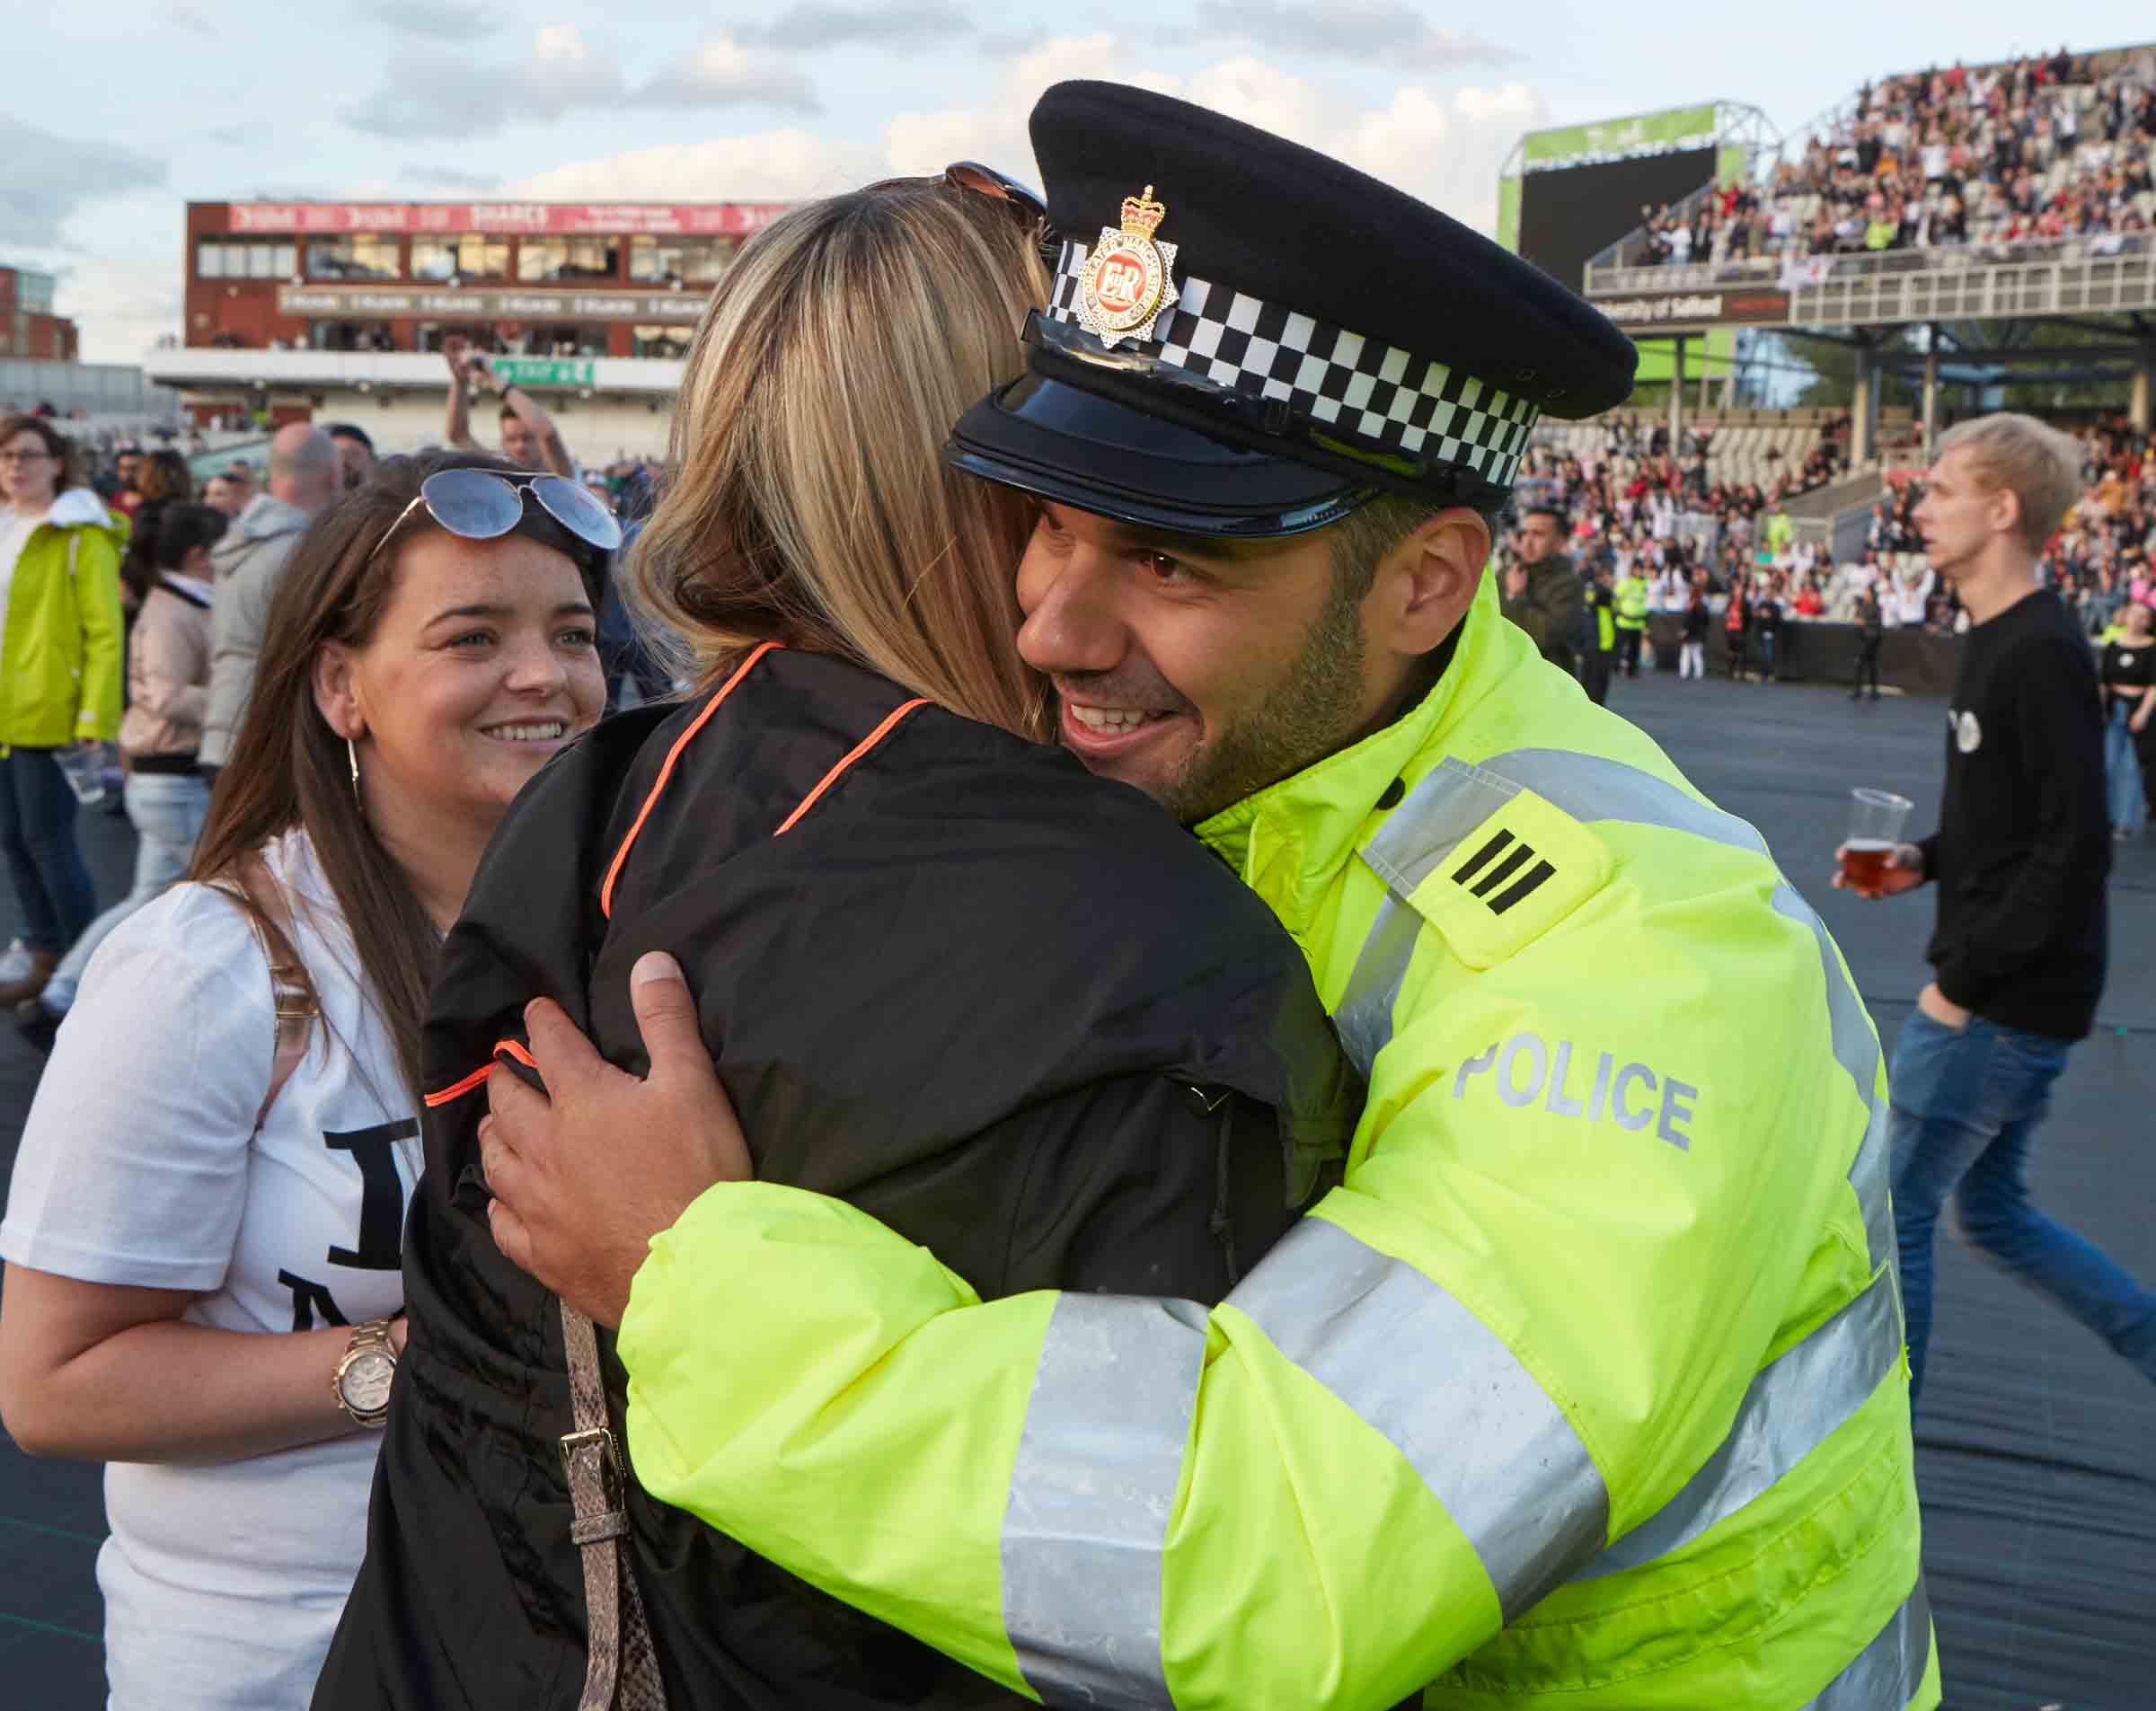 A photograph shows a Greater Manchester Police officer embracing a member of the public at the One Love concert in Manchester in June 2017